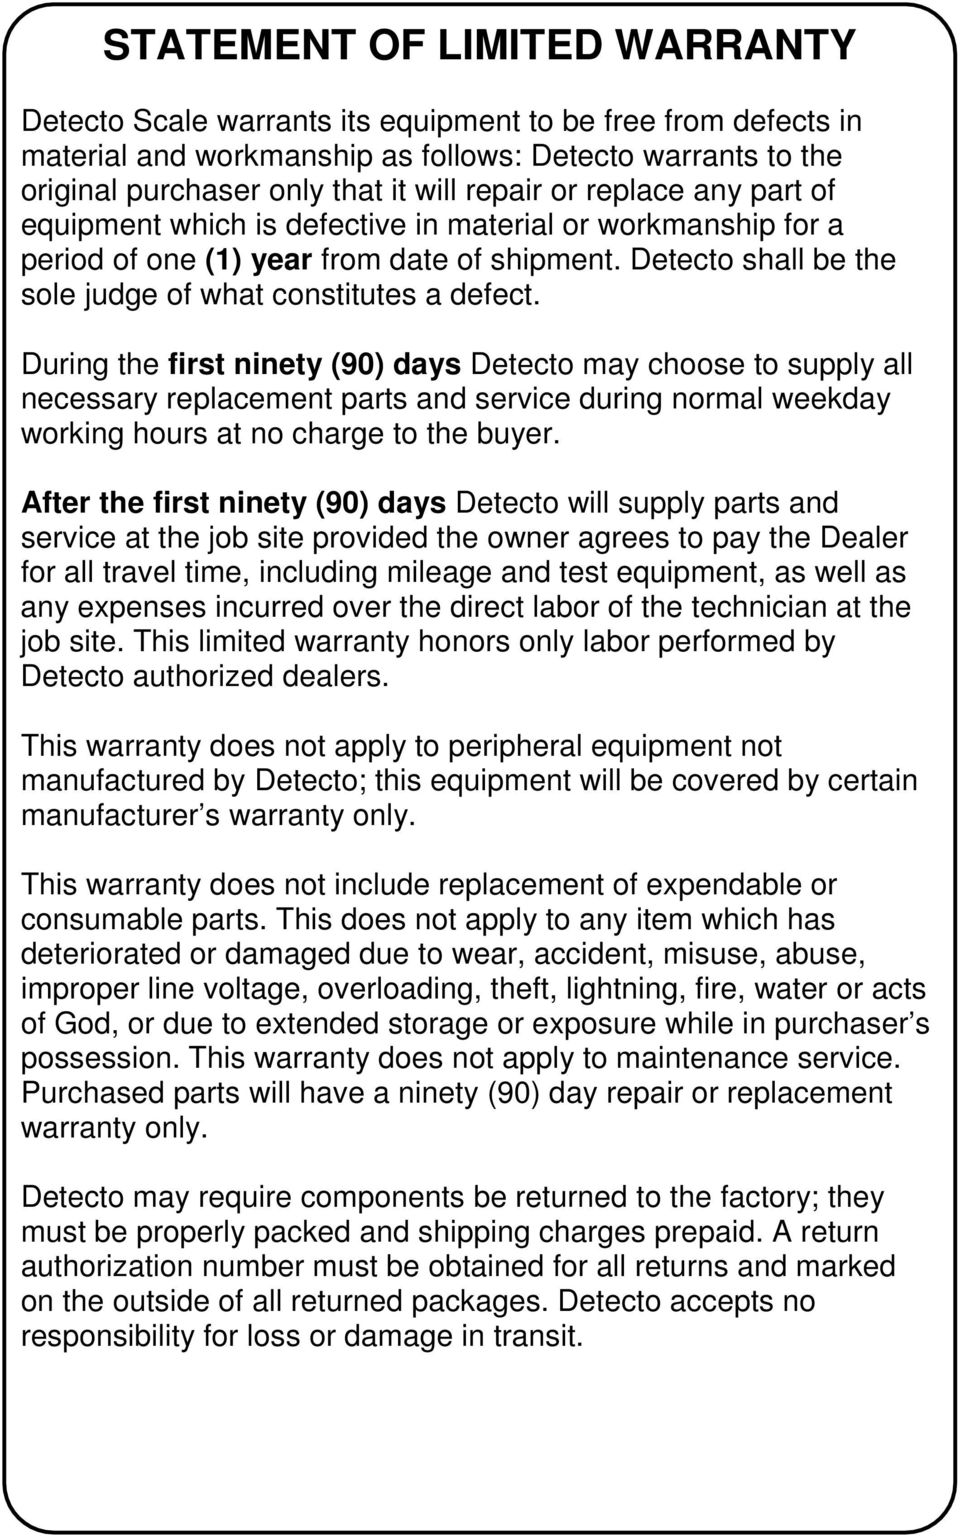 During the first ninety (90) days Detecto may choose to supply all necessary replacement parts and service during normal weekday working hours at no charge to the buyer.